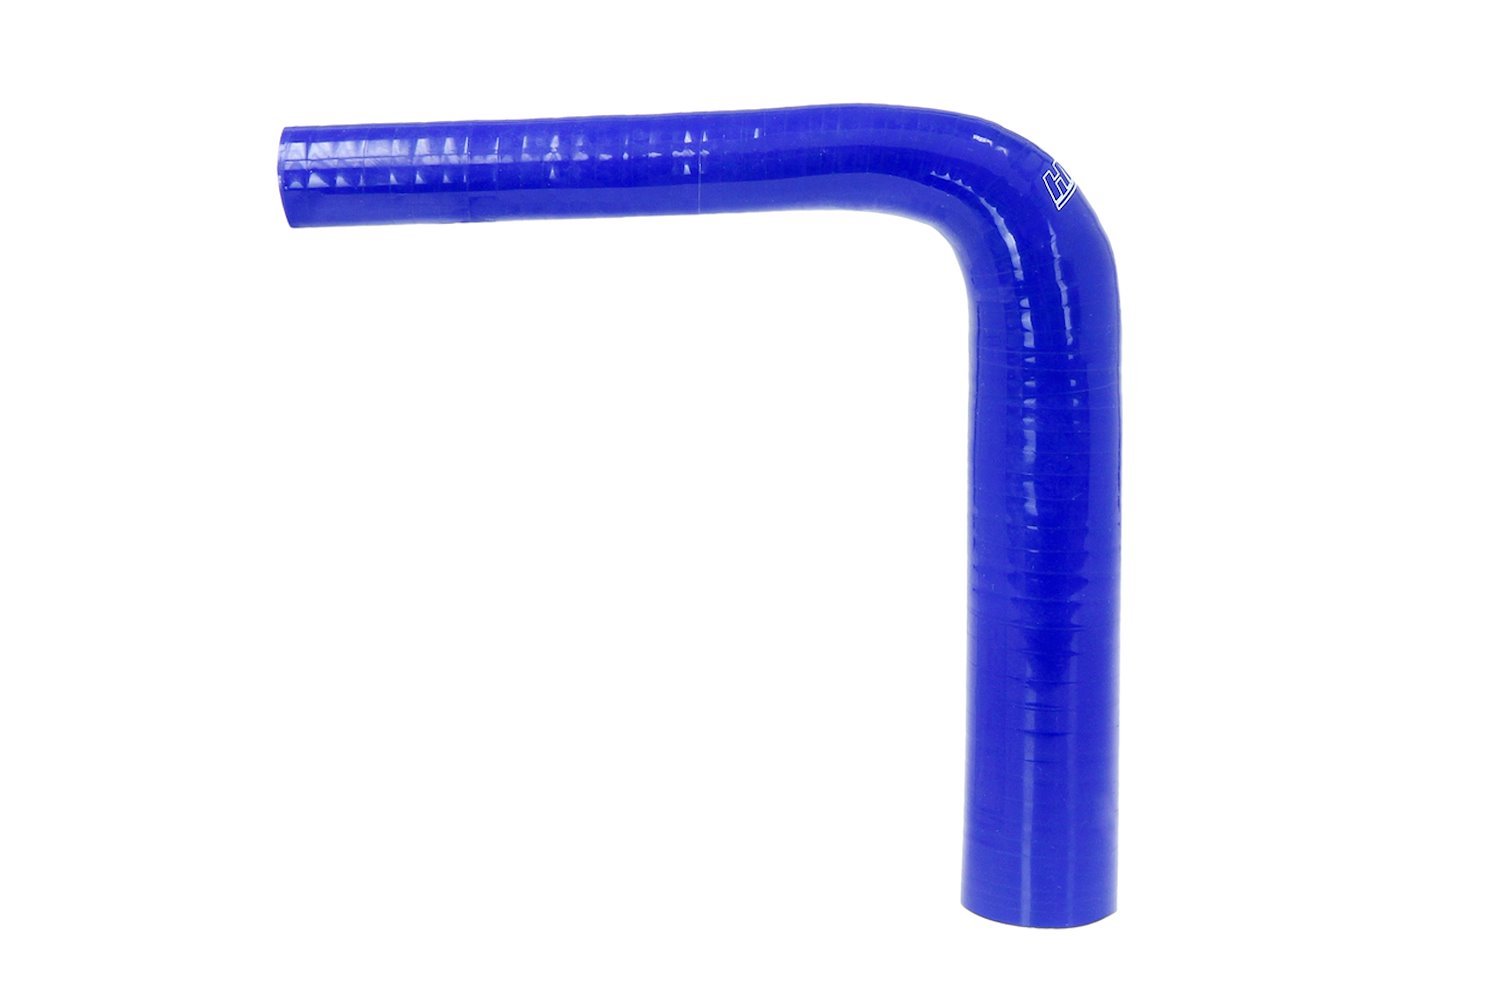 HTSER90-050-062-BLUE Silicone 90-Degree Elbow Hose, High-Temp 4-Ply Reinforced, 1/2 in. - 5/8 in. ID, Blue